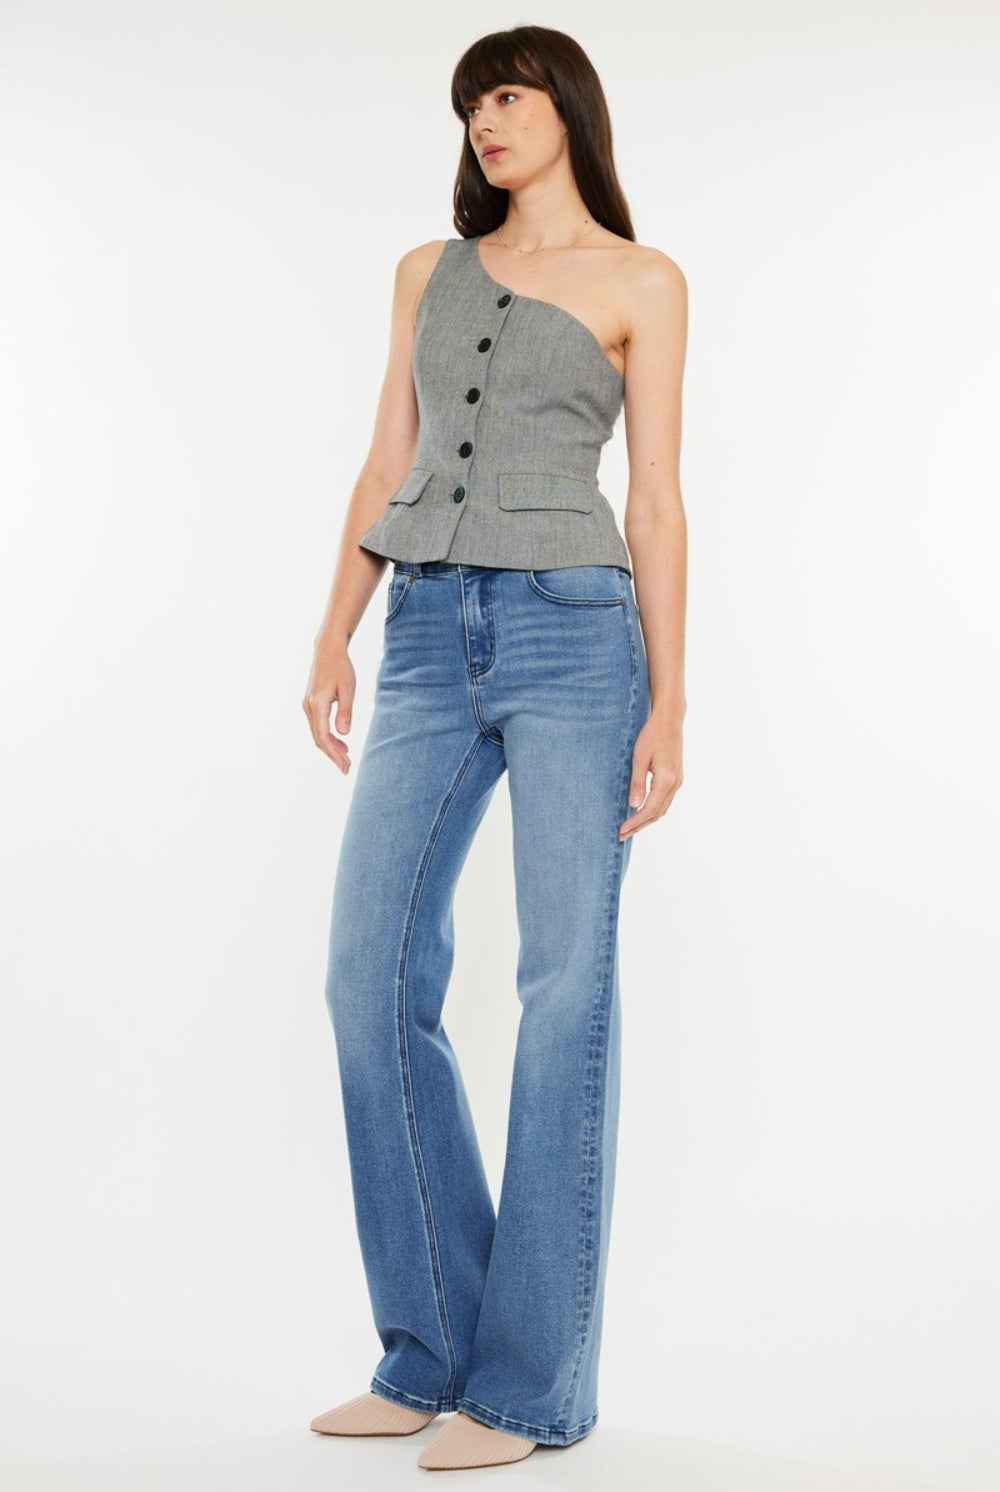 Kancan Ultra High Rise Cat's Whiskers Jeans-Krush Kandy, Women's Online Fashion Boutique Located in Phoenix, Arizona (Scottsdale Area)